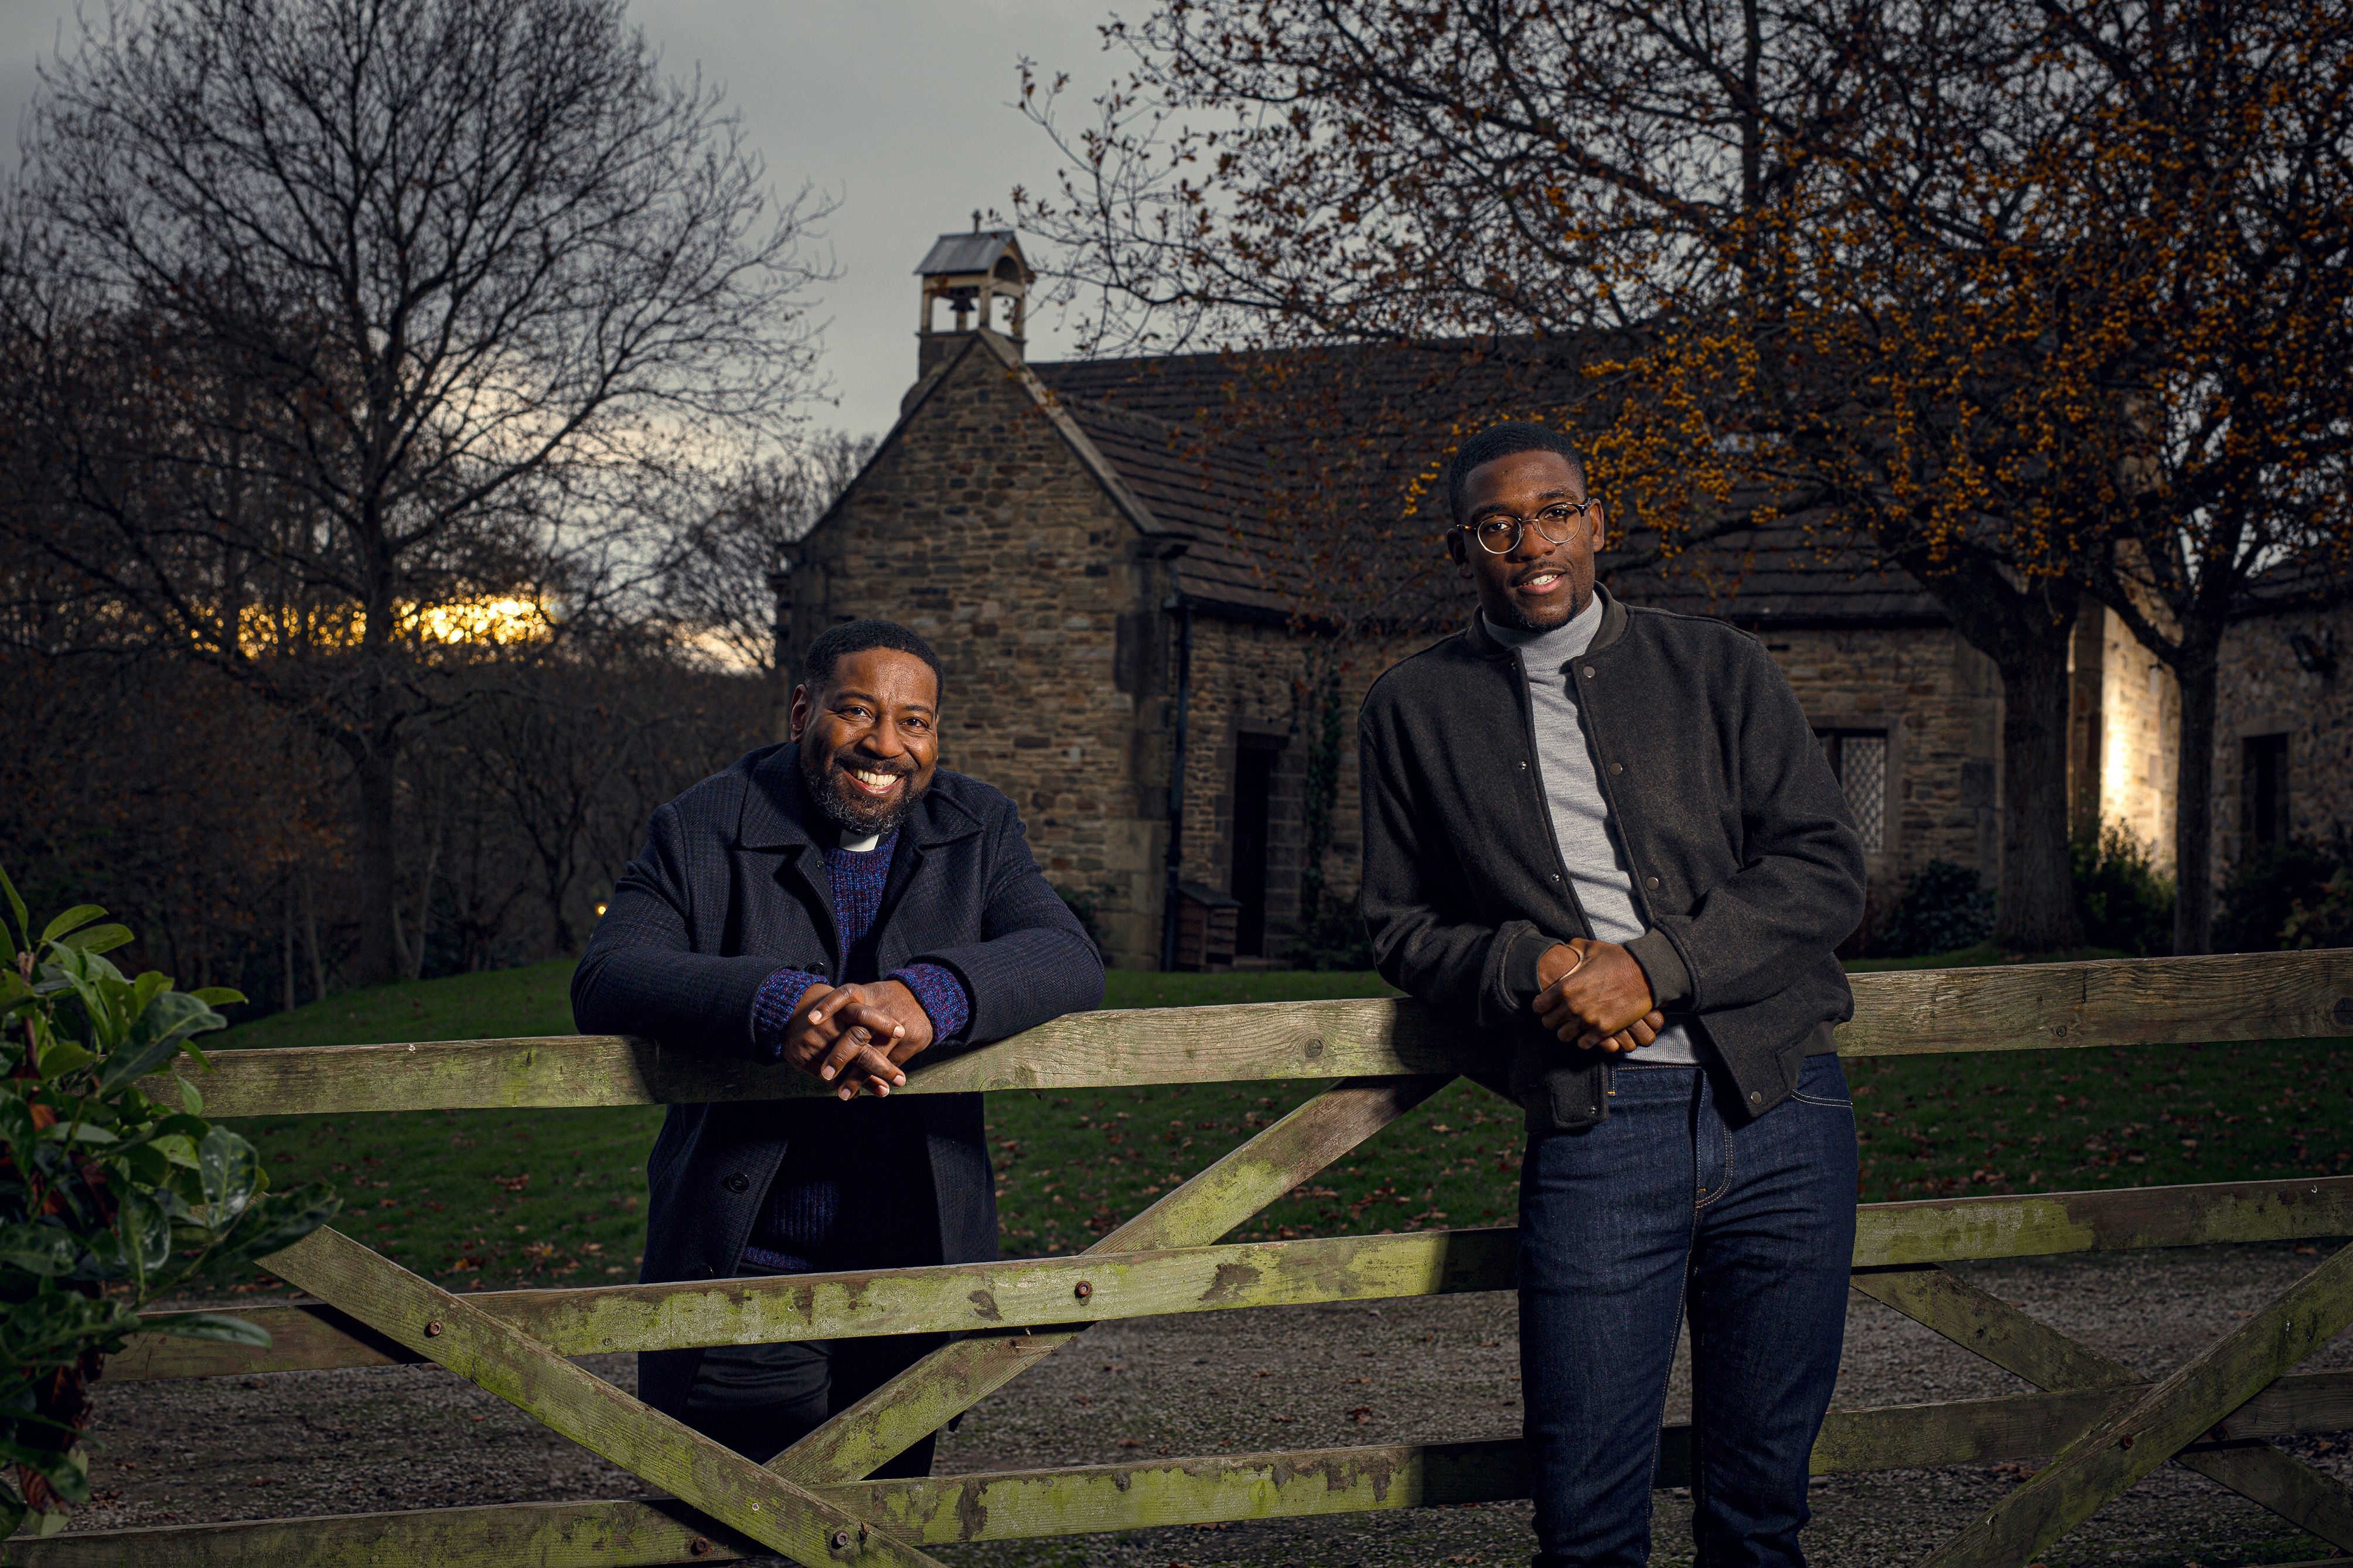 Emmerdale newcomers Kevin Mathurin and Emile John discover they might be related